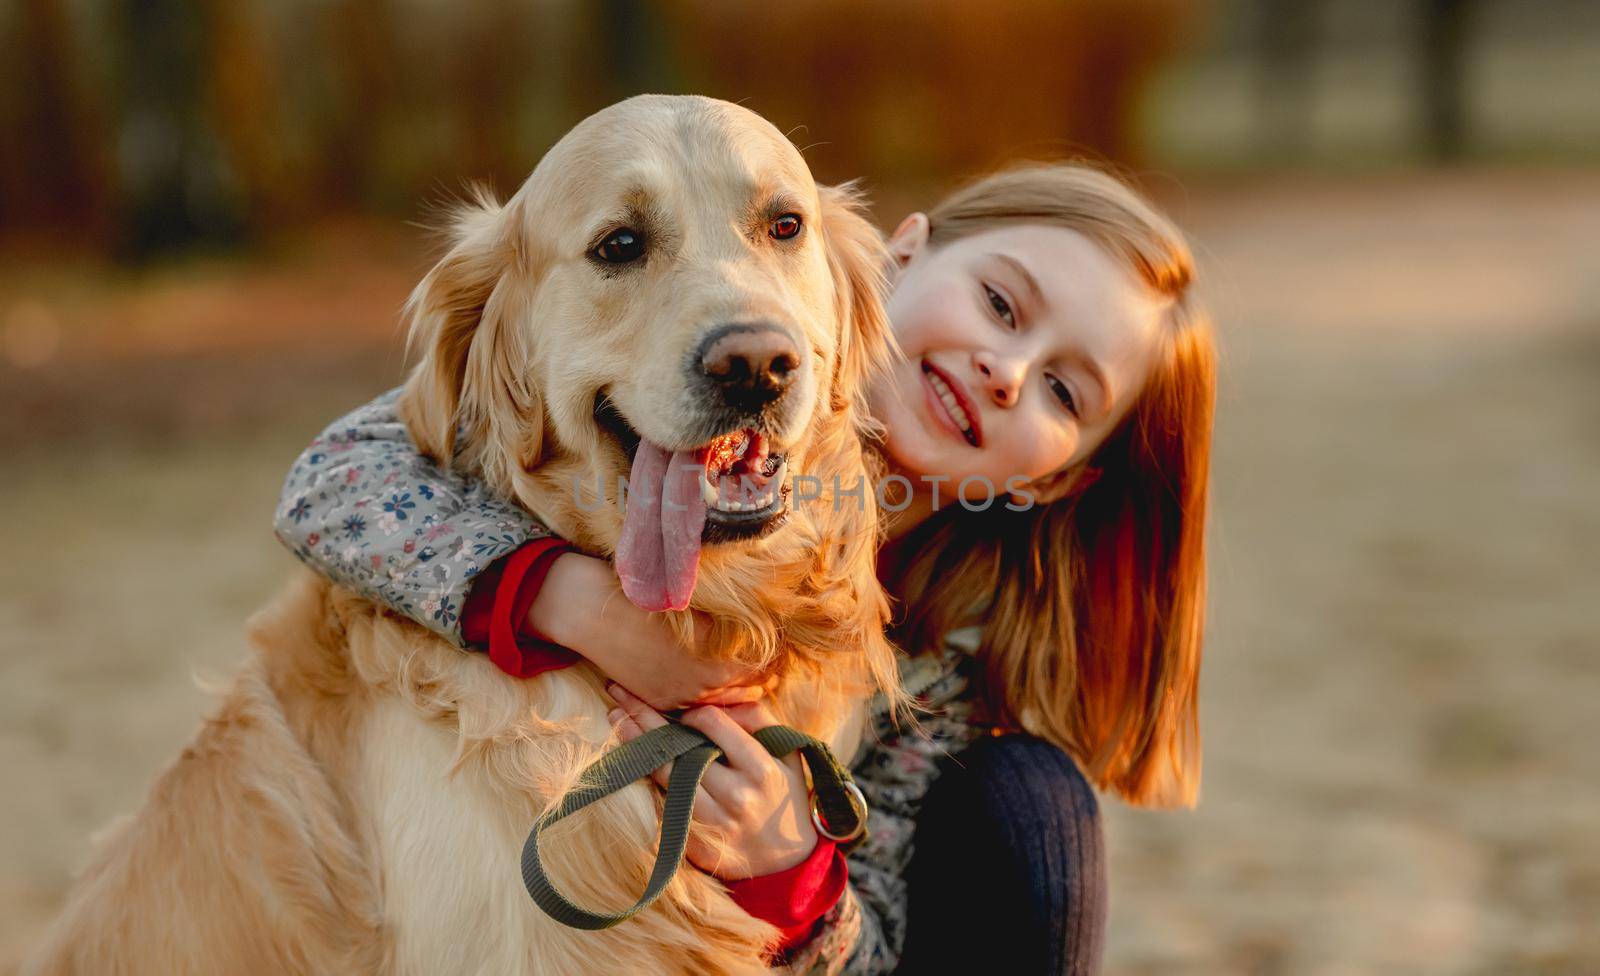 Preteen girl with golden retriever dog sitting in park in beautiful spring autumn day. Adorable female child kid hugging doggy pet outdoors and smiling portrait